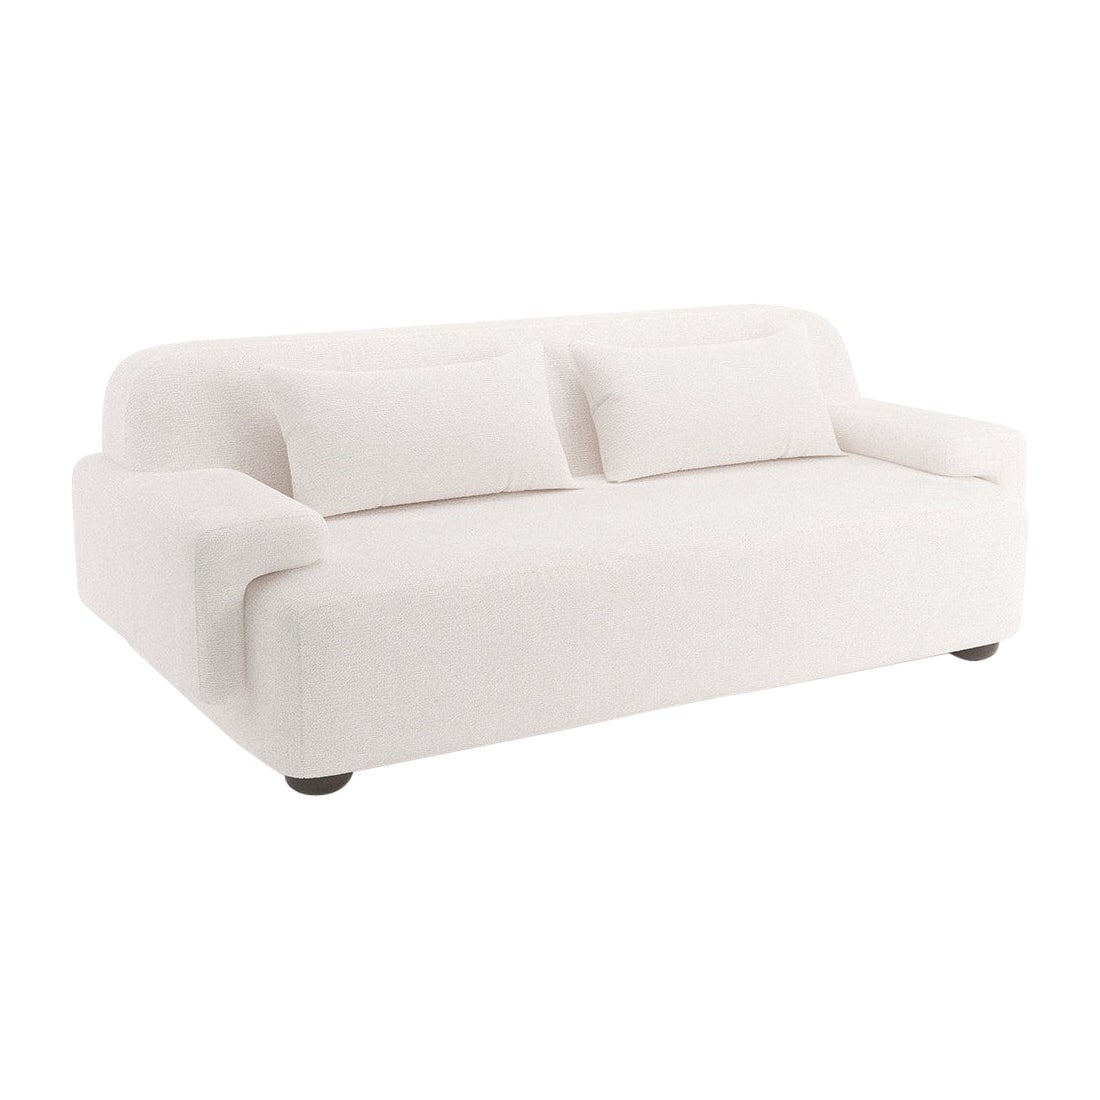 Popus Editions Lena 2.5 Seater Sofa in Ivory Megeve Fabric with Knit Effect For Sale